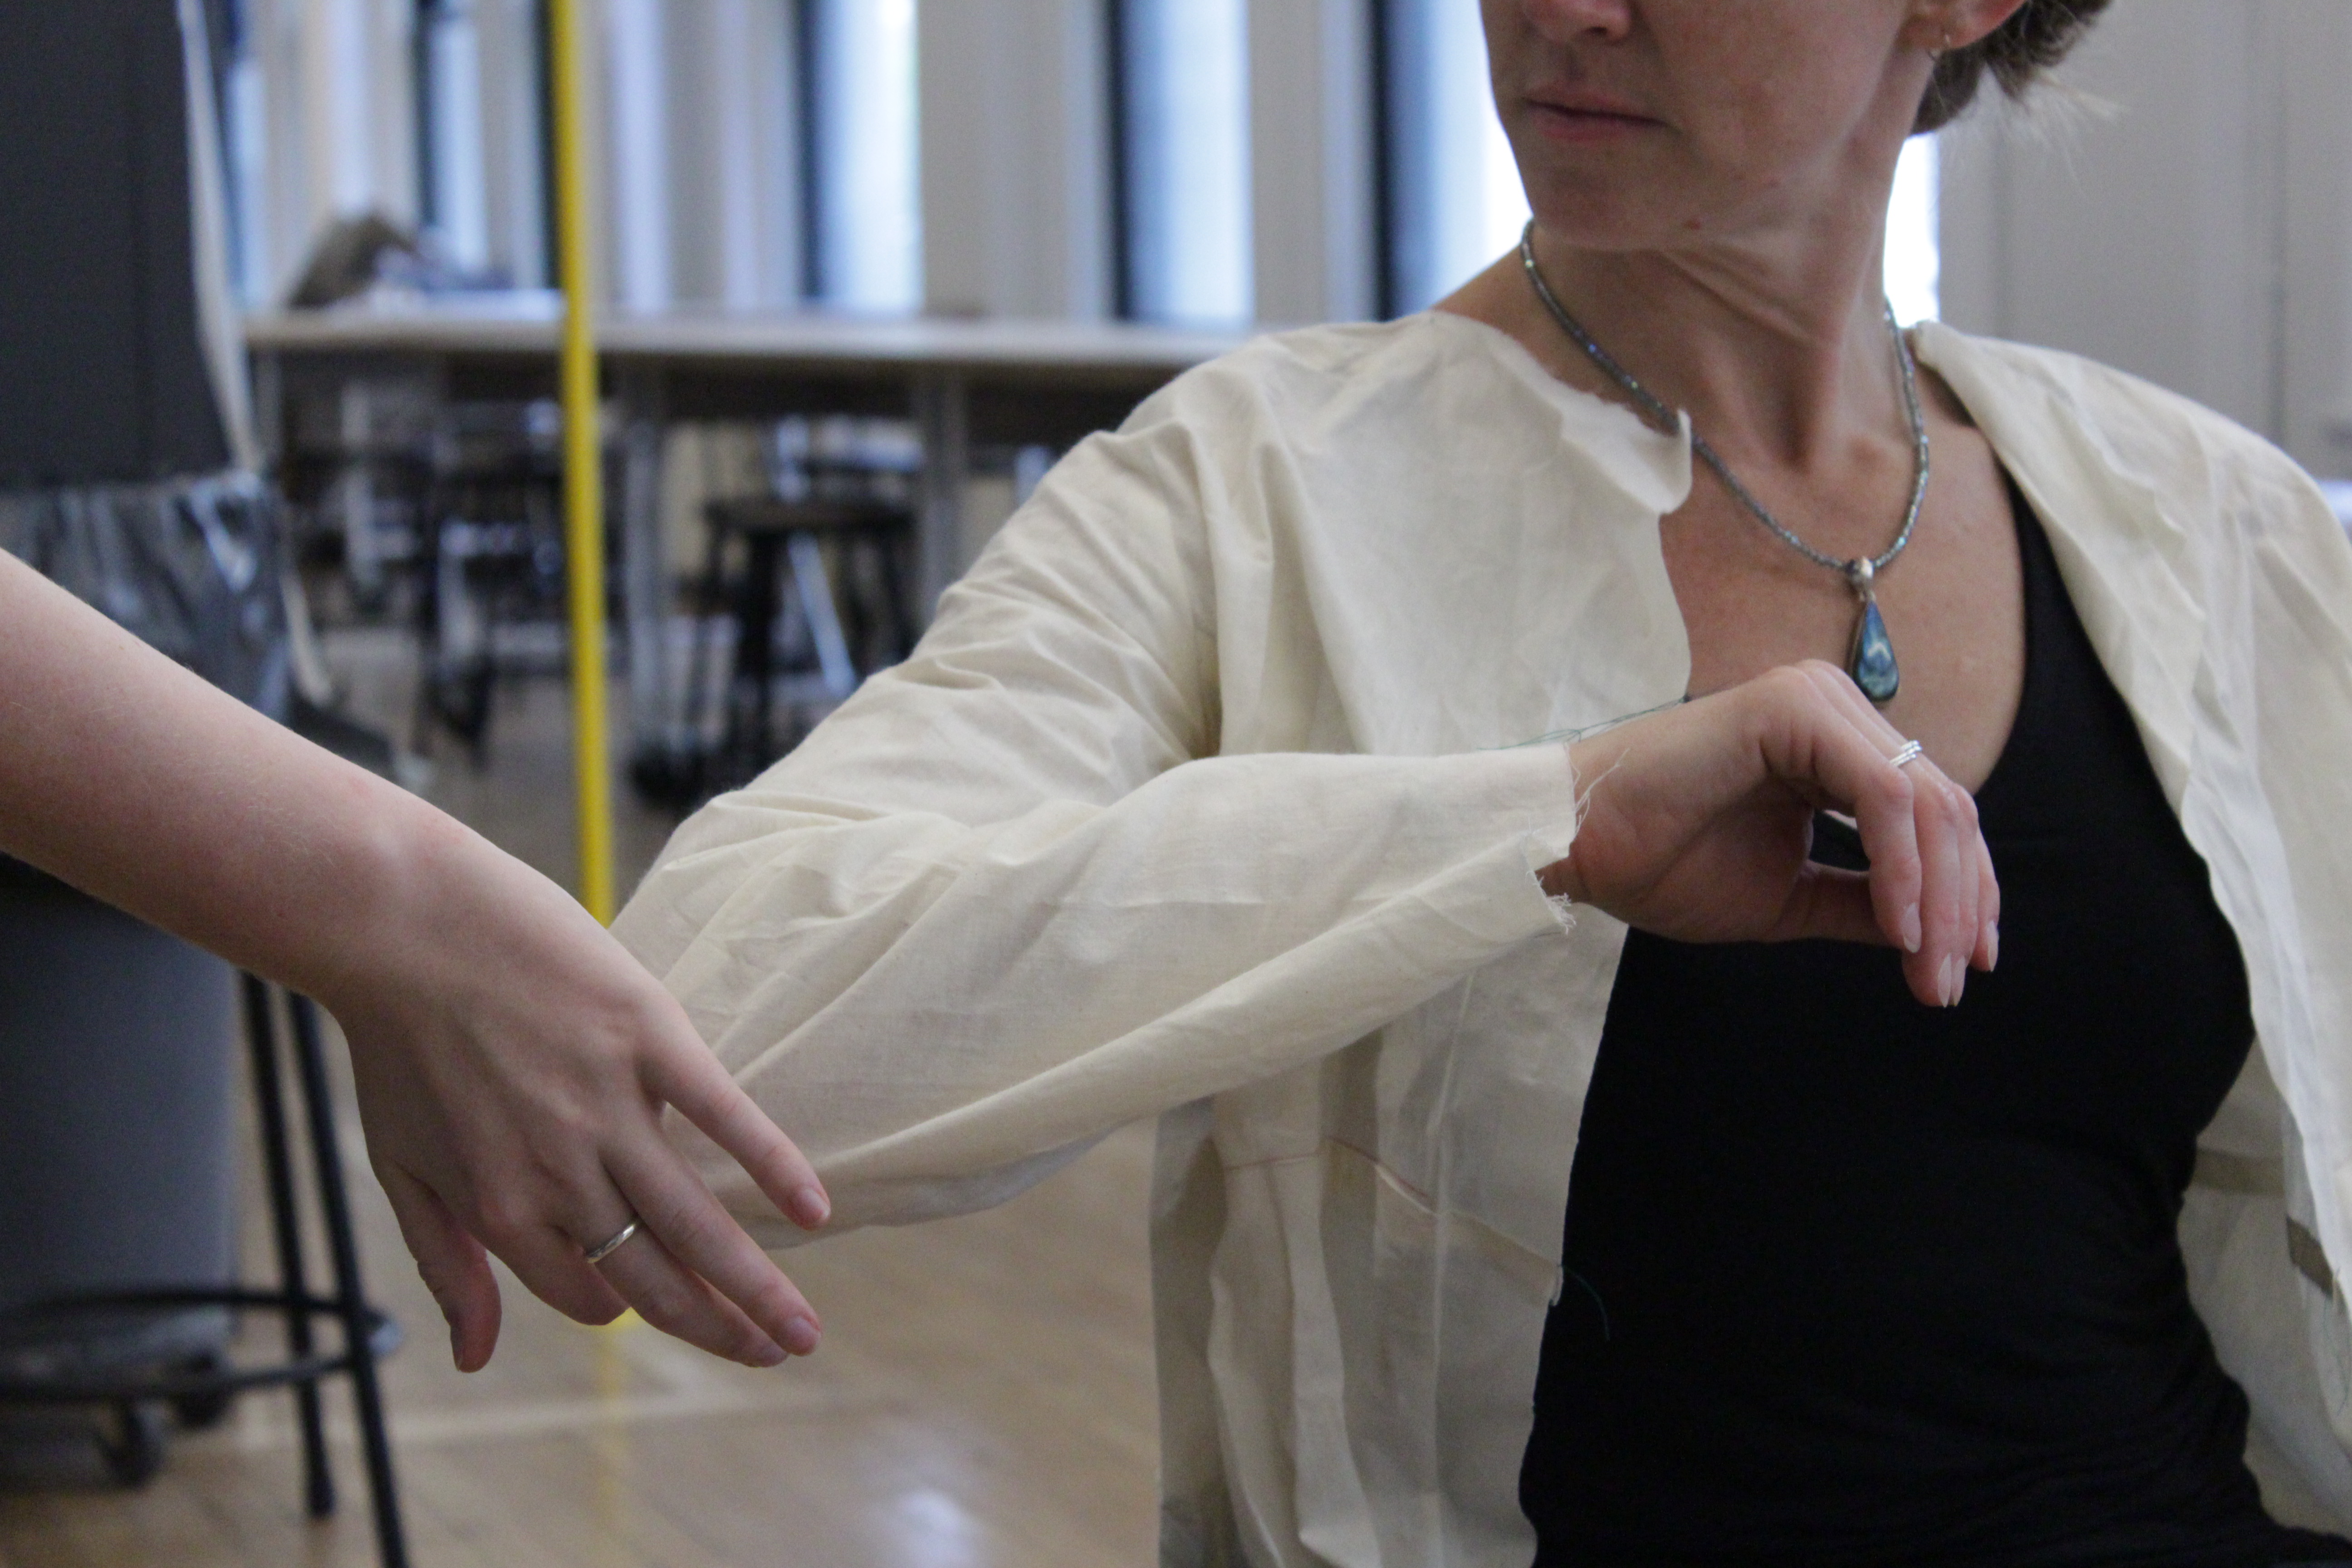 Photo of April trying a pattern prototype of the jacket. She is flexing her right elbow and there is a hand touching her elbow.